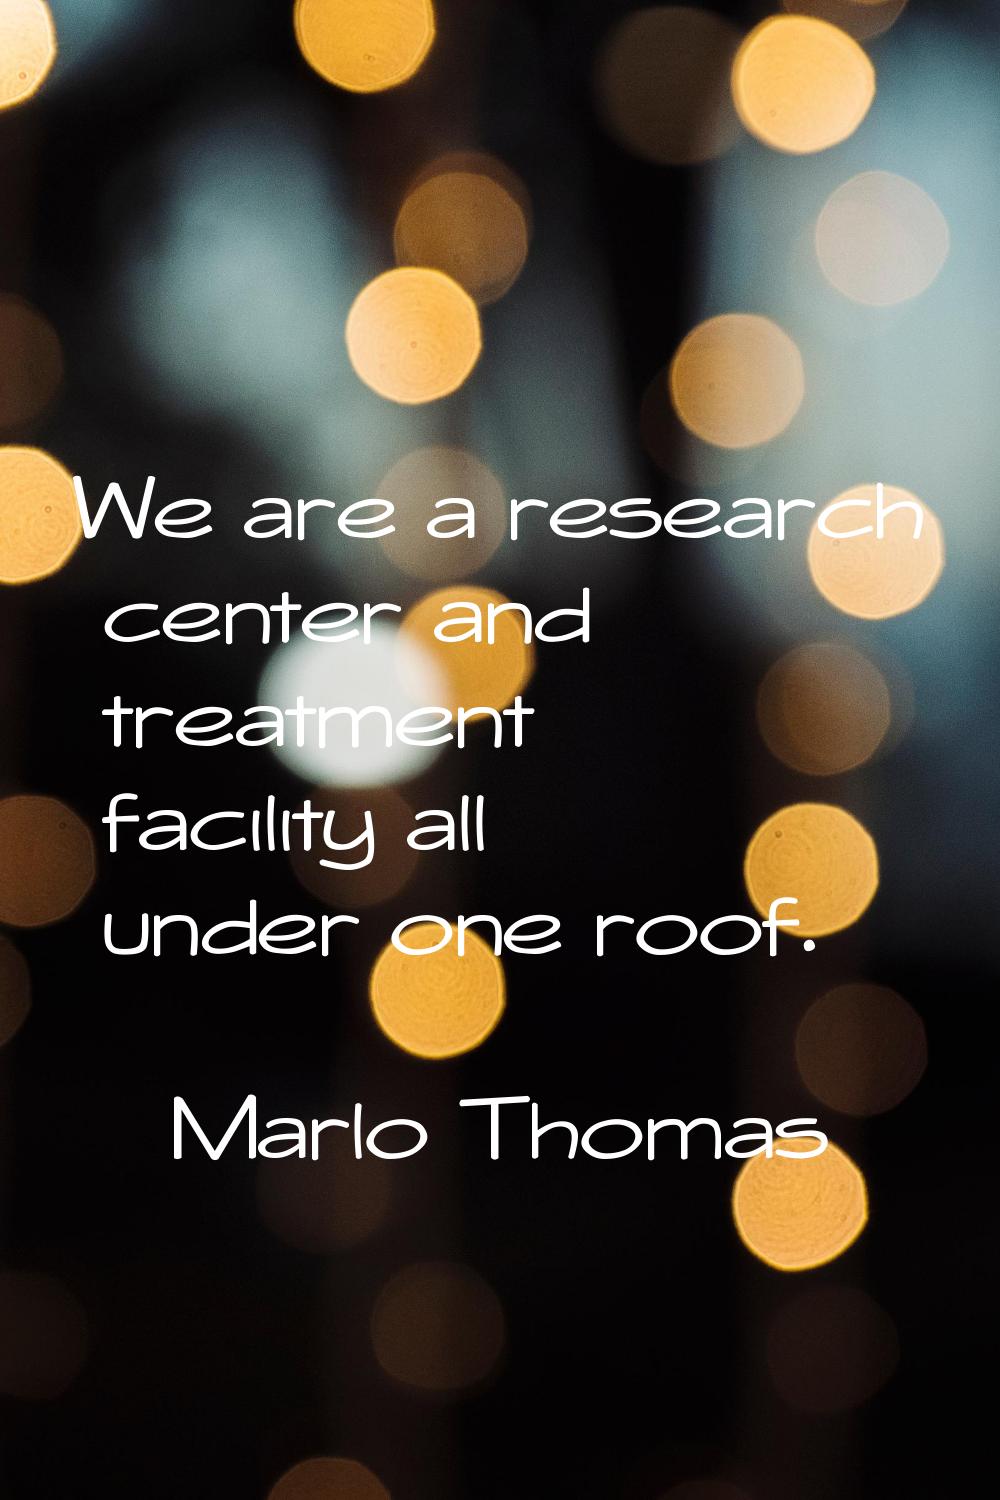 We are a research center and treatment facility all under one roof.